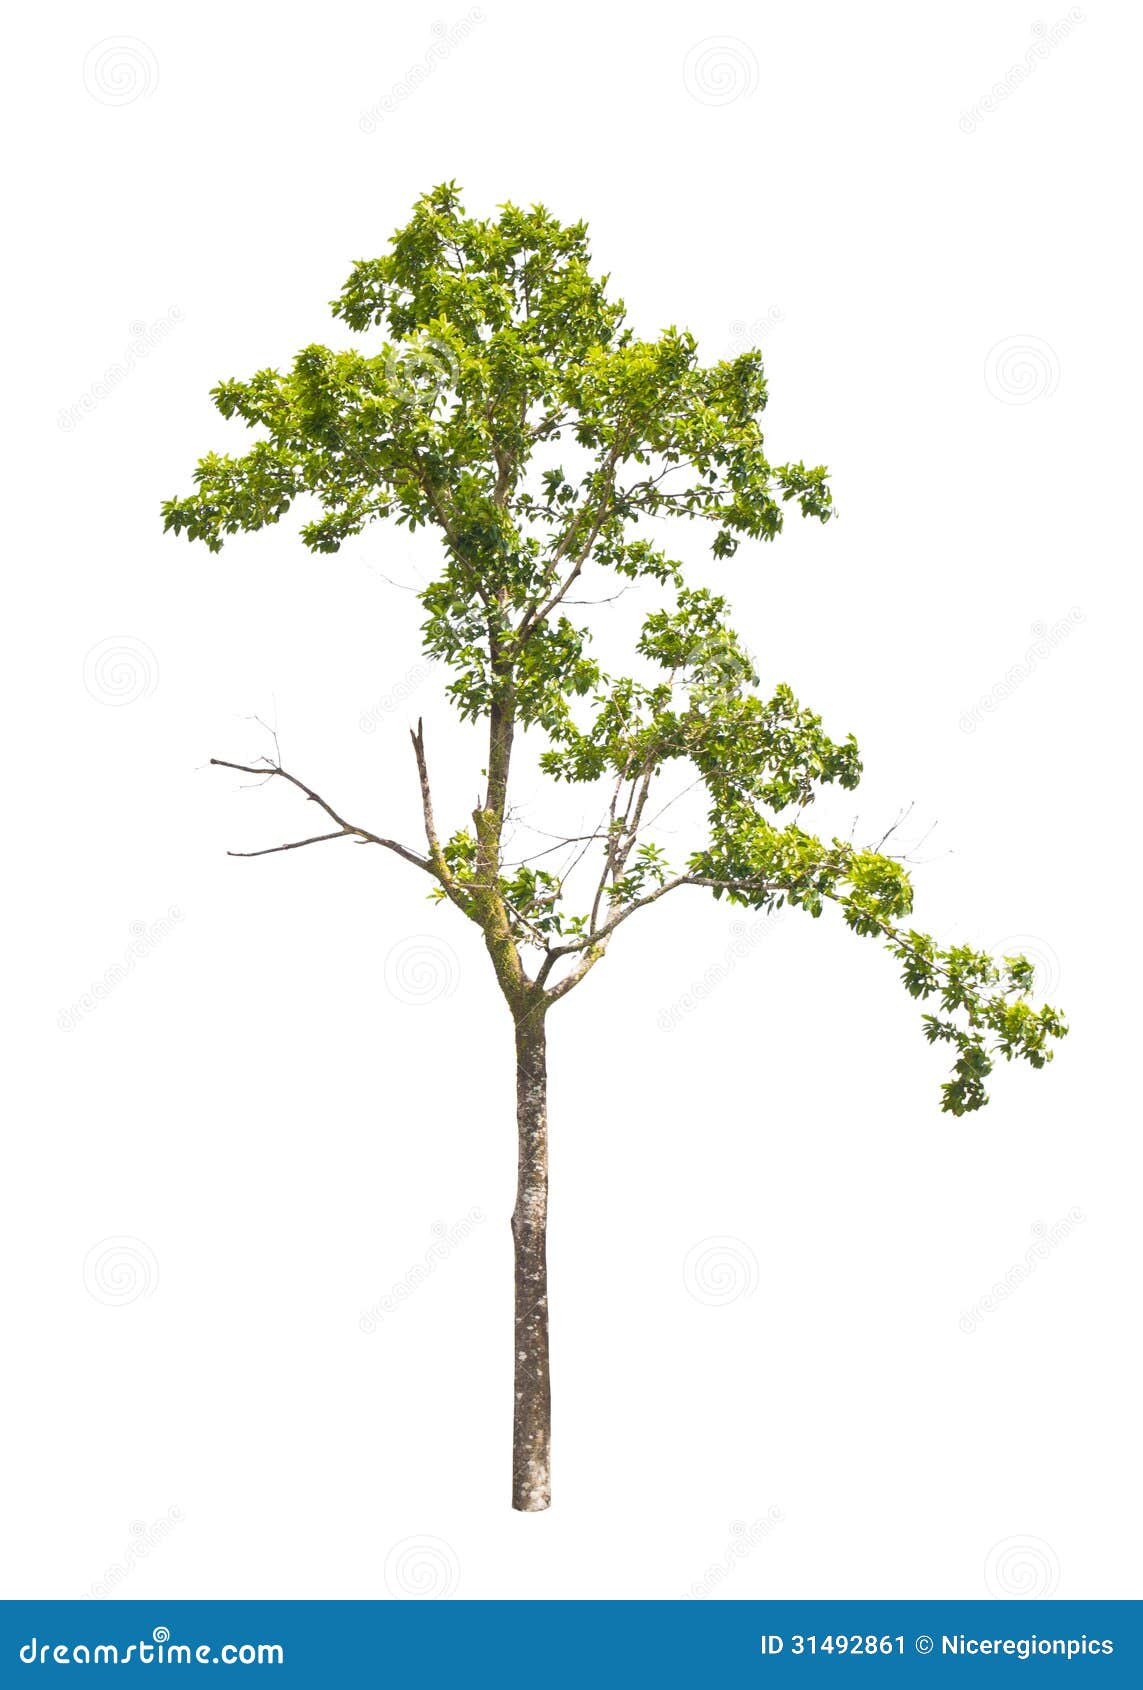 Tropical tree in asia. stock image. Image of evergreen - 31492861